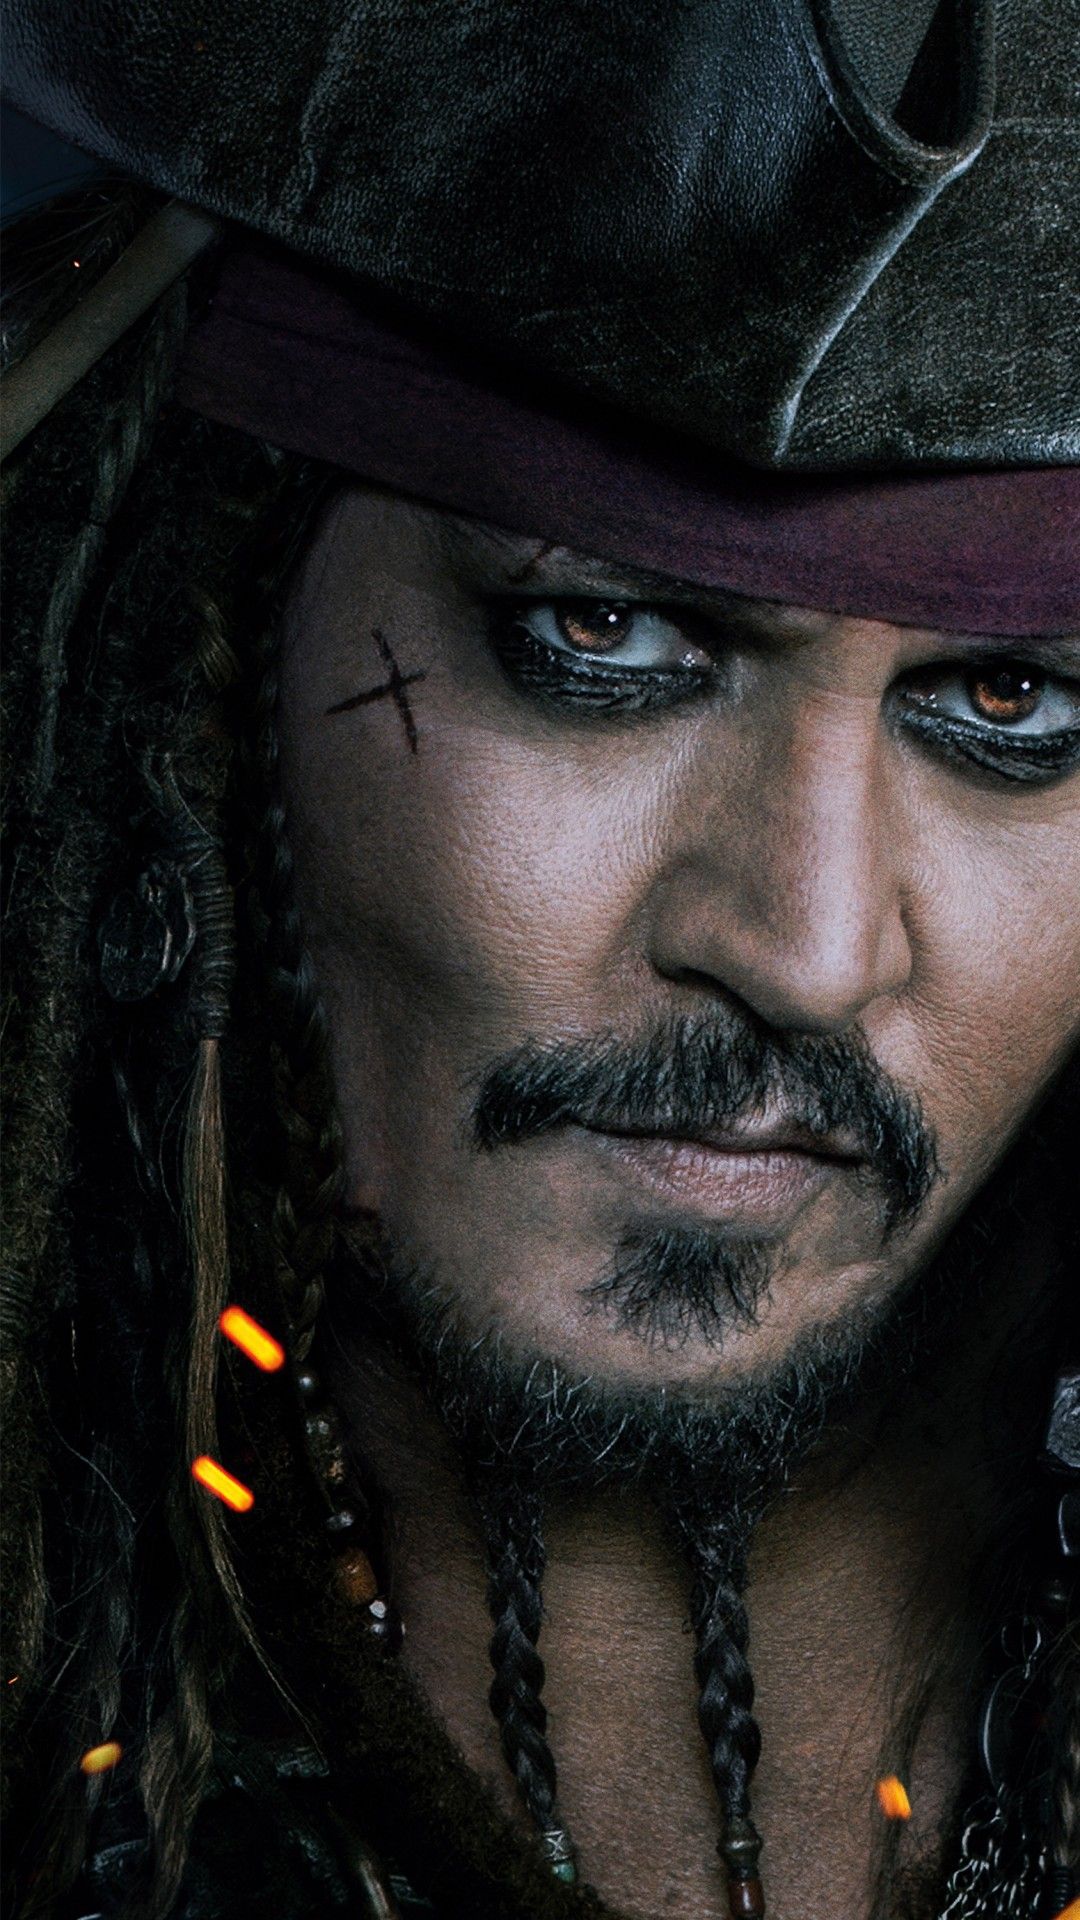 Wallpaper Johnny Depp, Captain Jack Sparrow, Movies,. Wallpaper for iPhone, Android, Mobile and Desktop